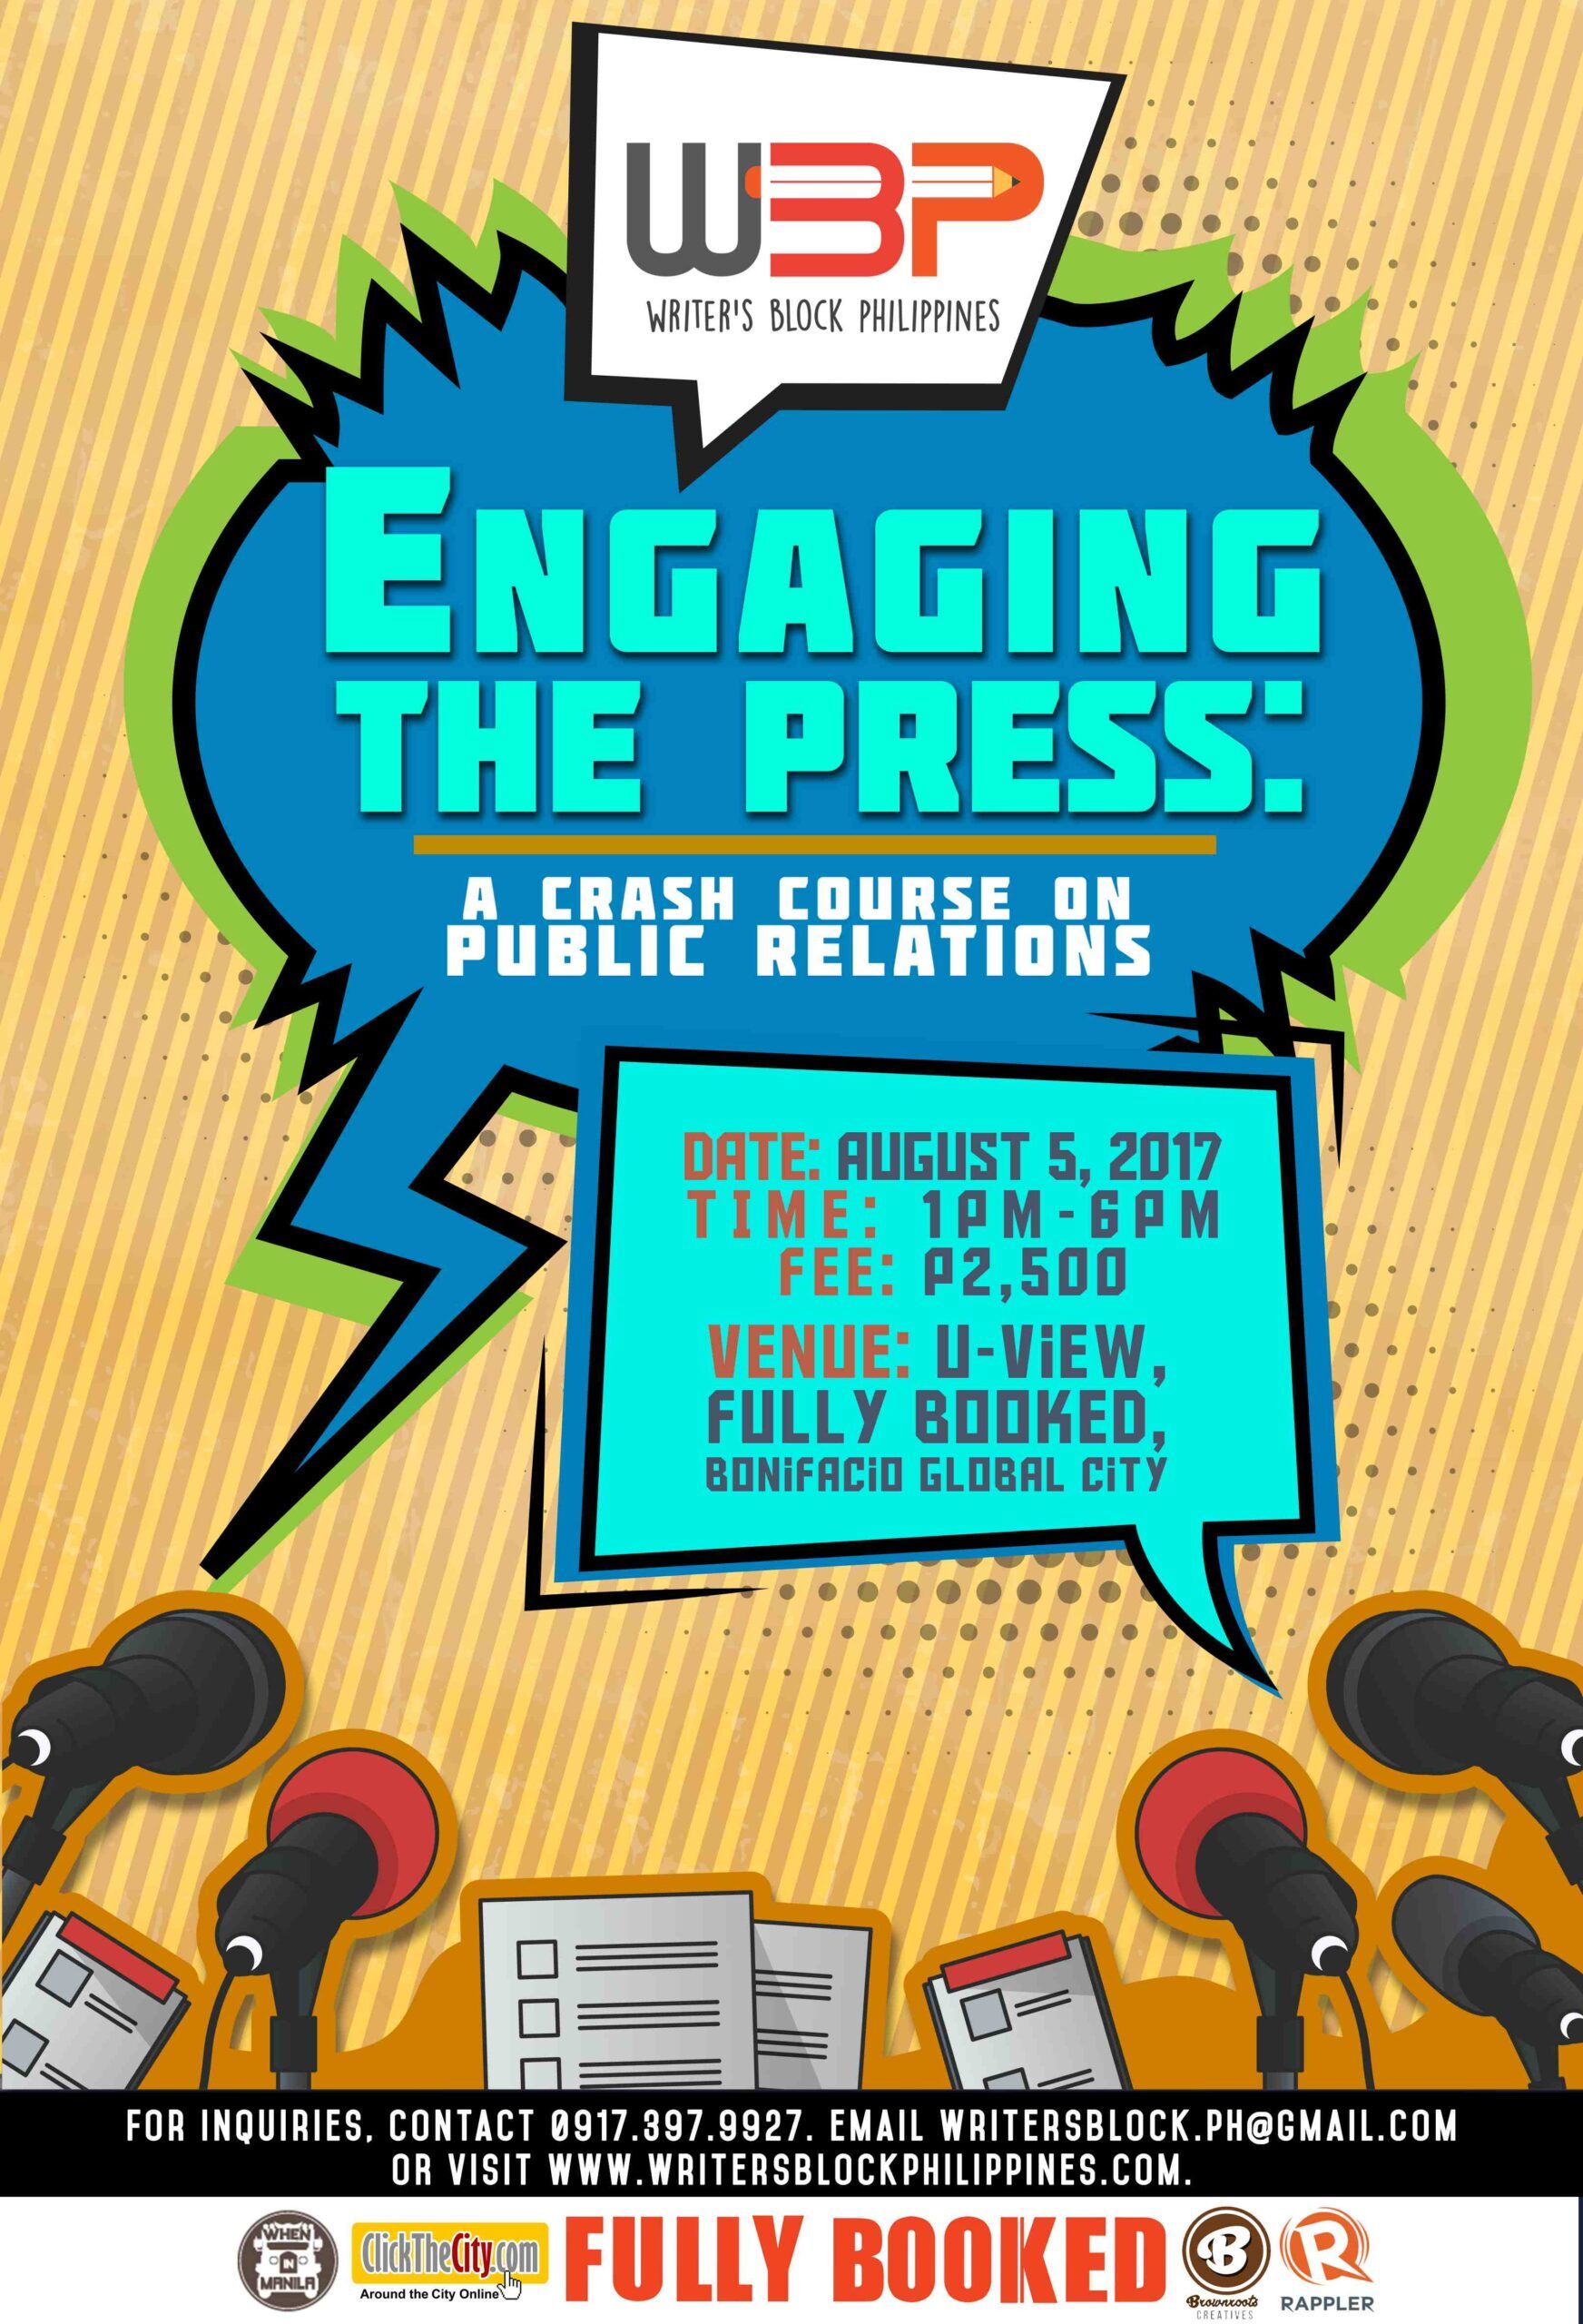 Know the basics of public relations